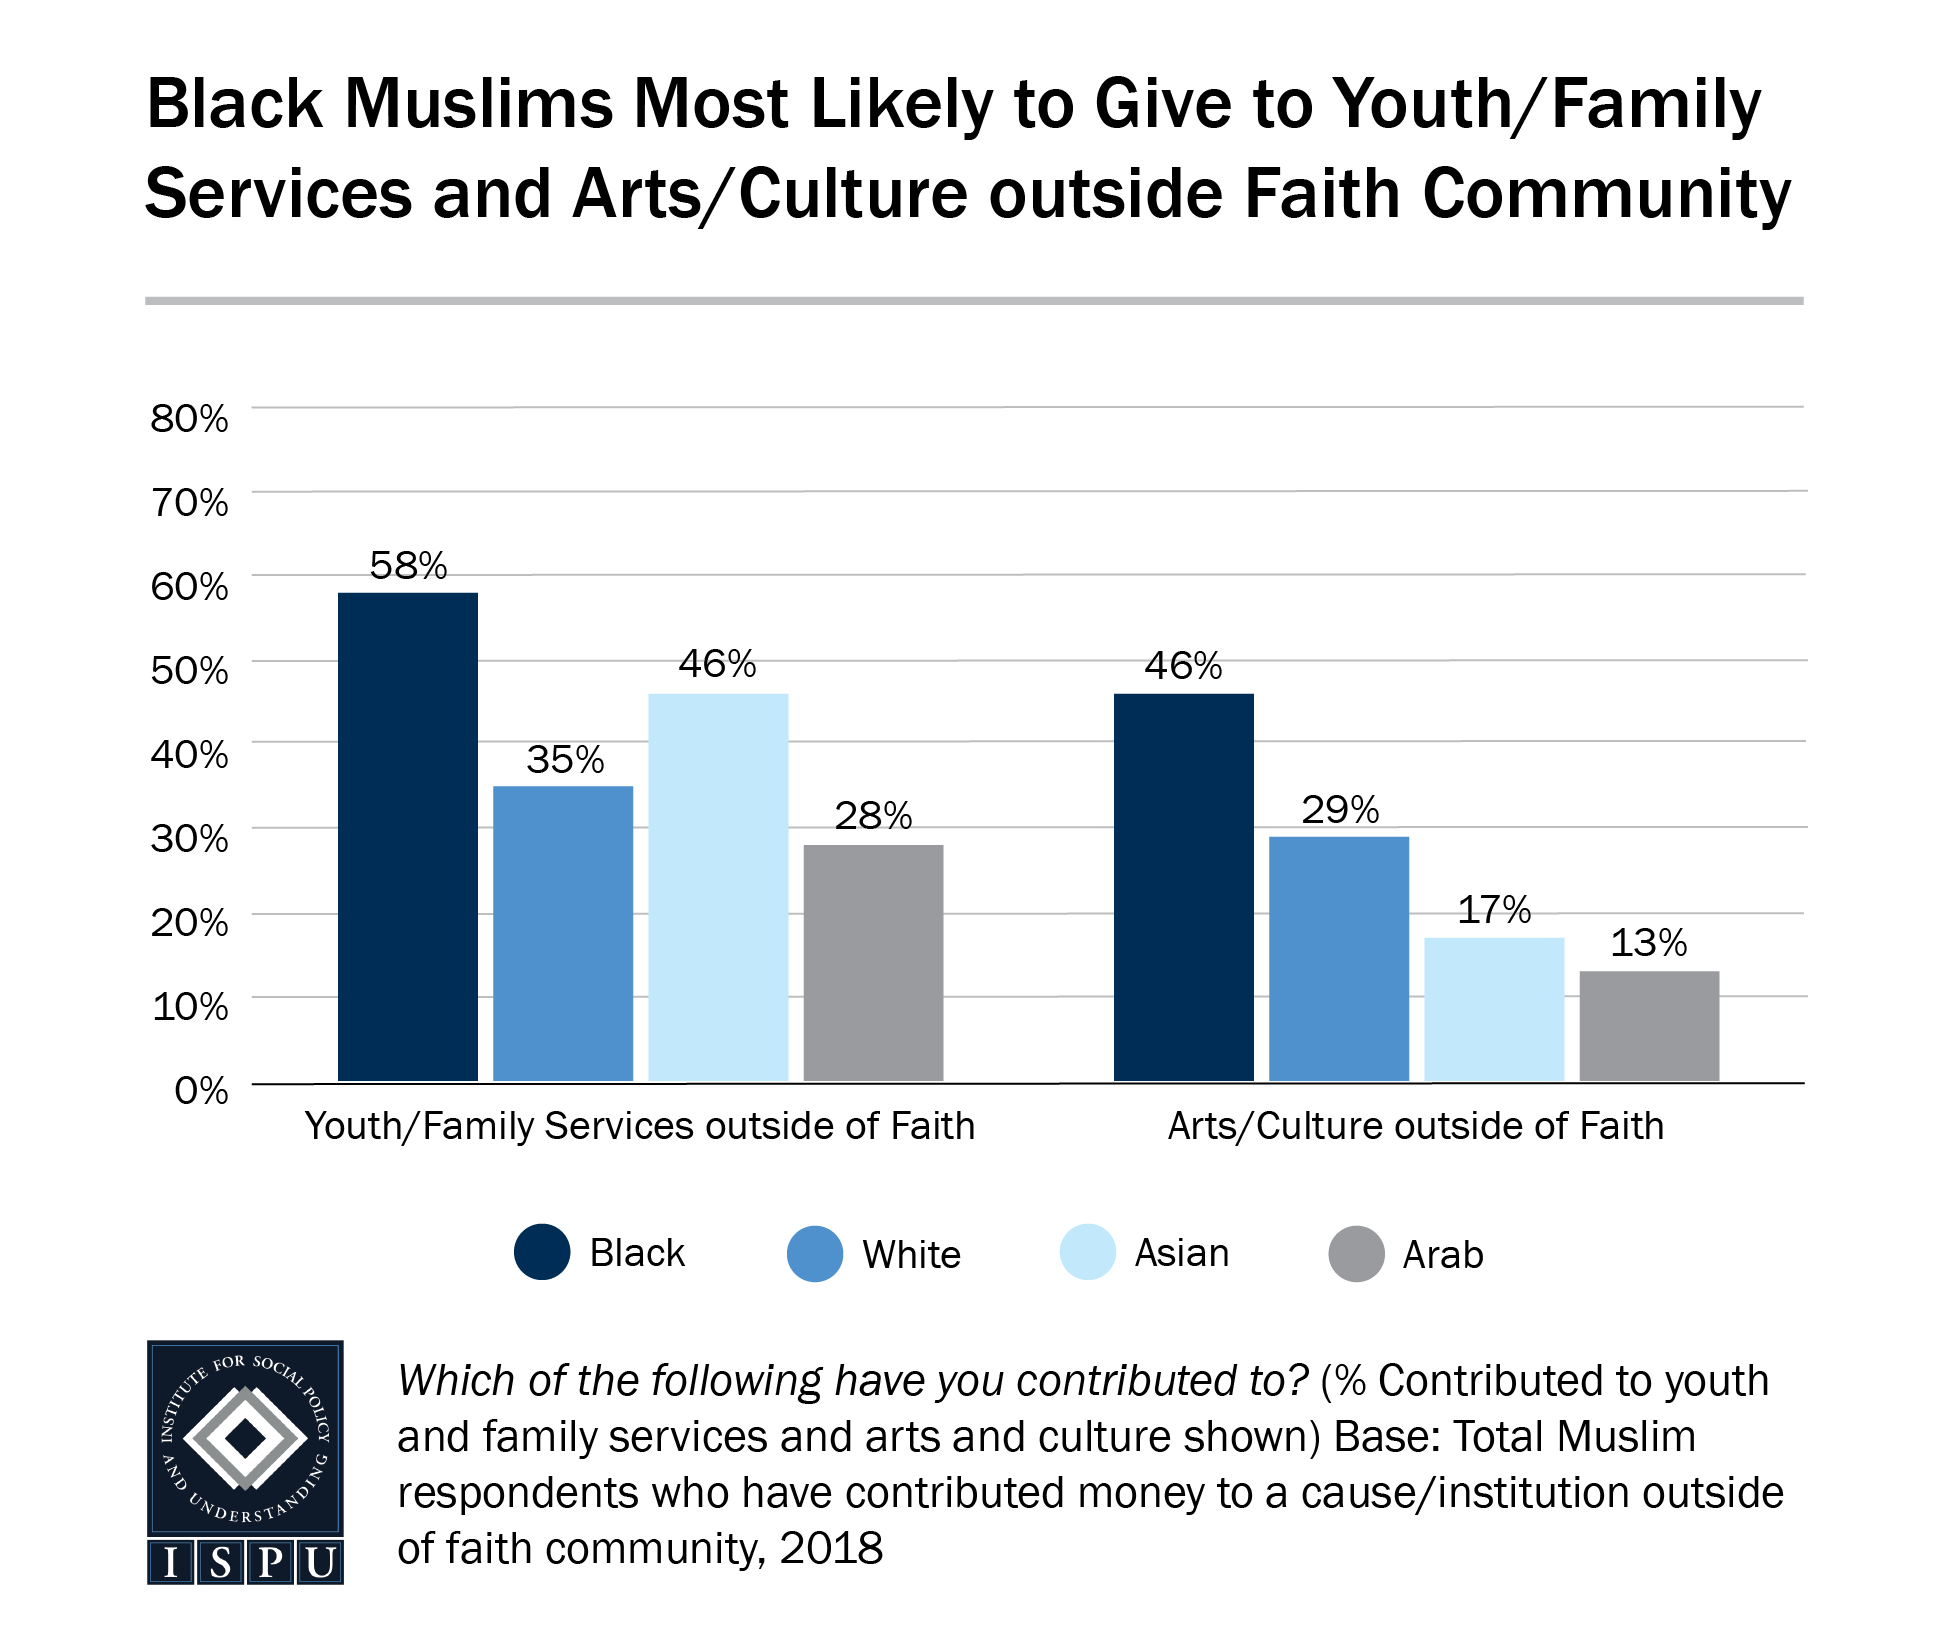 A bar graph showing that Black Muslims are the most likely to give to youth/family services and arts/culture organizations outside of their faith community